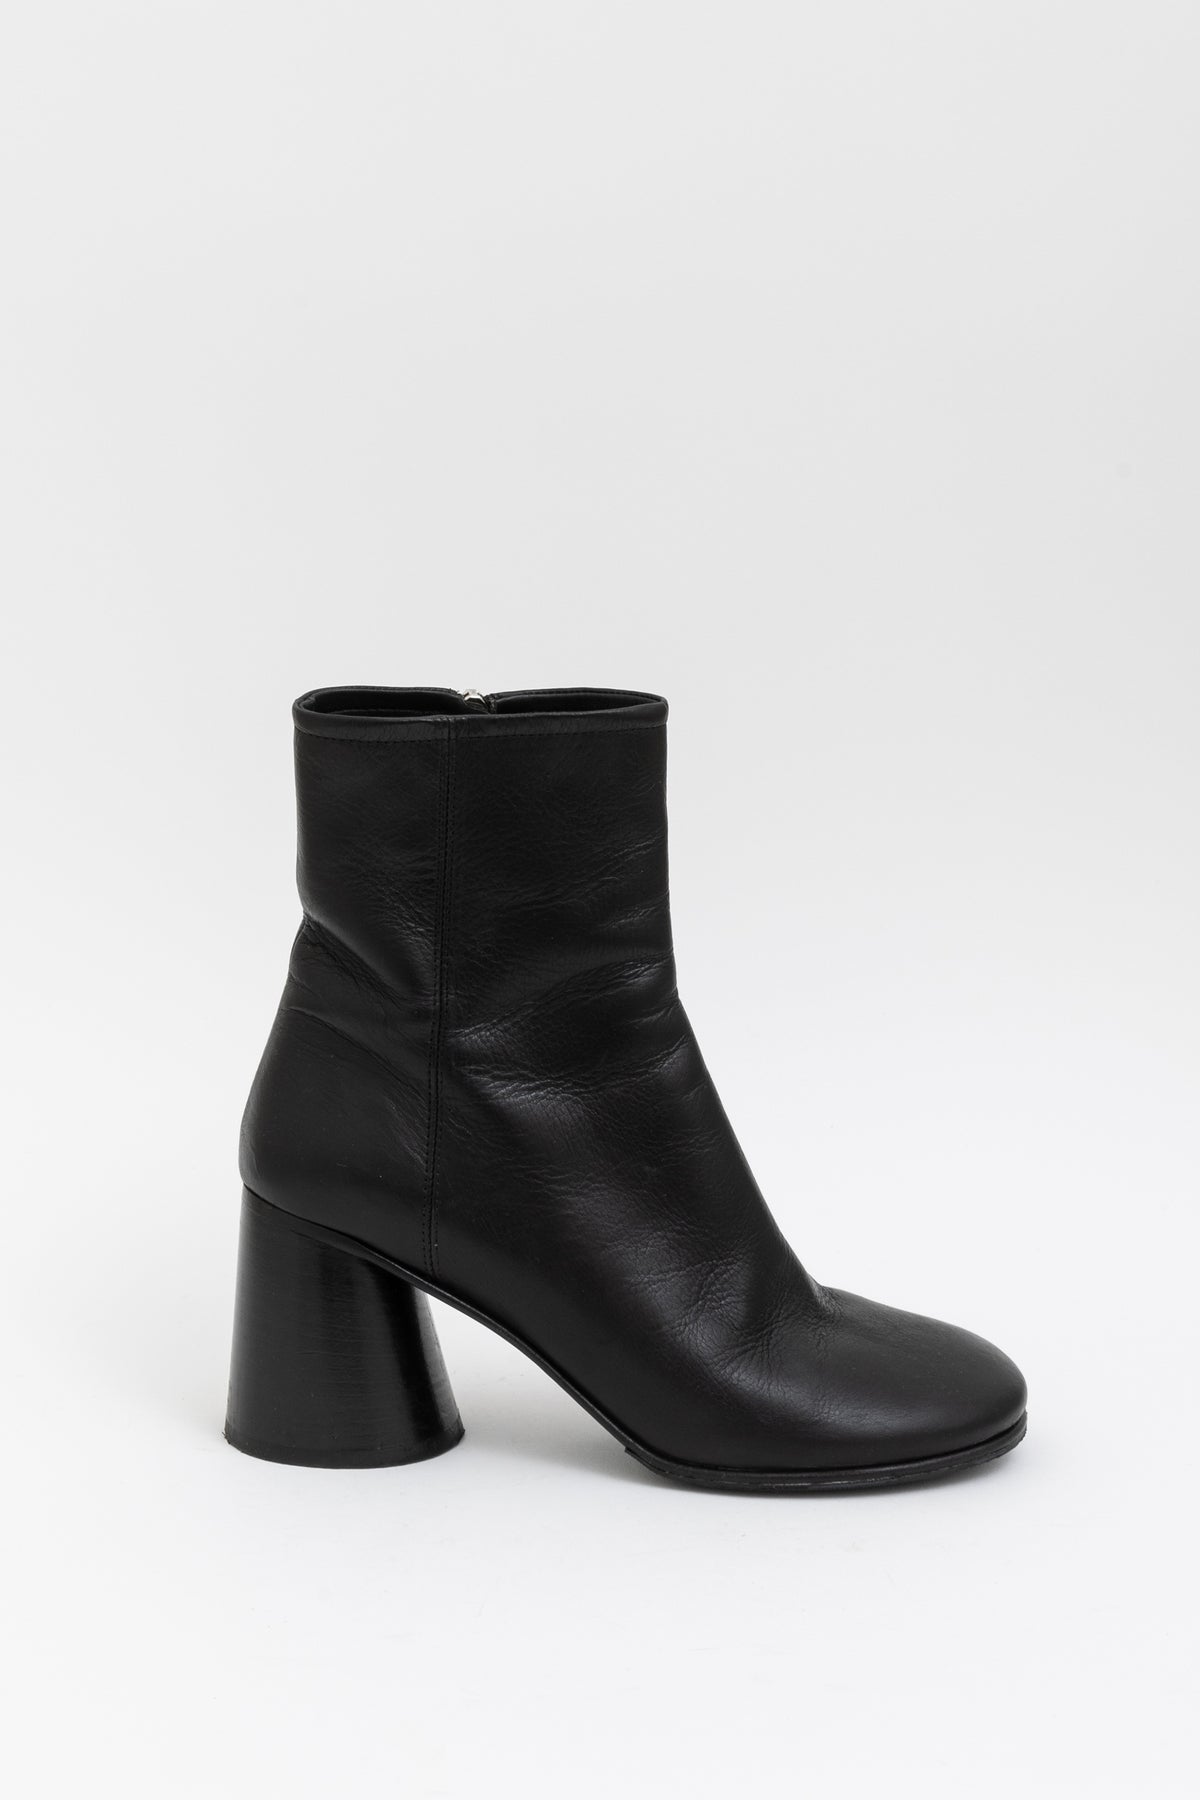 Buffie Ankle Boots